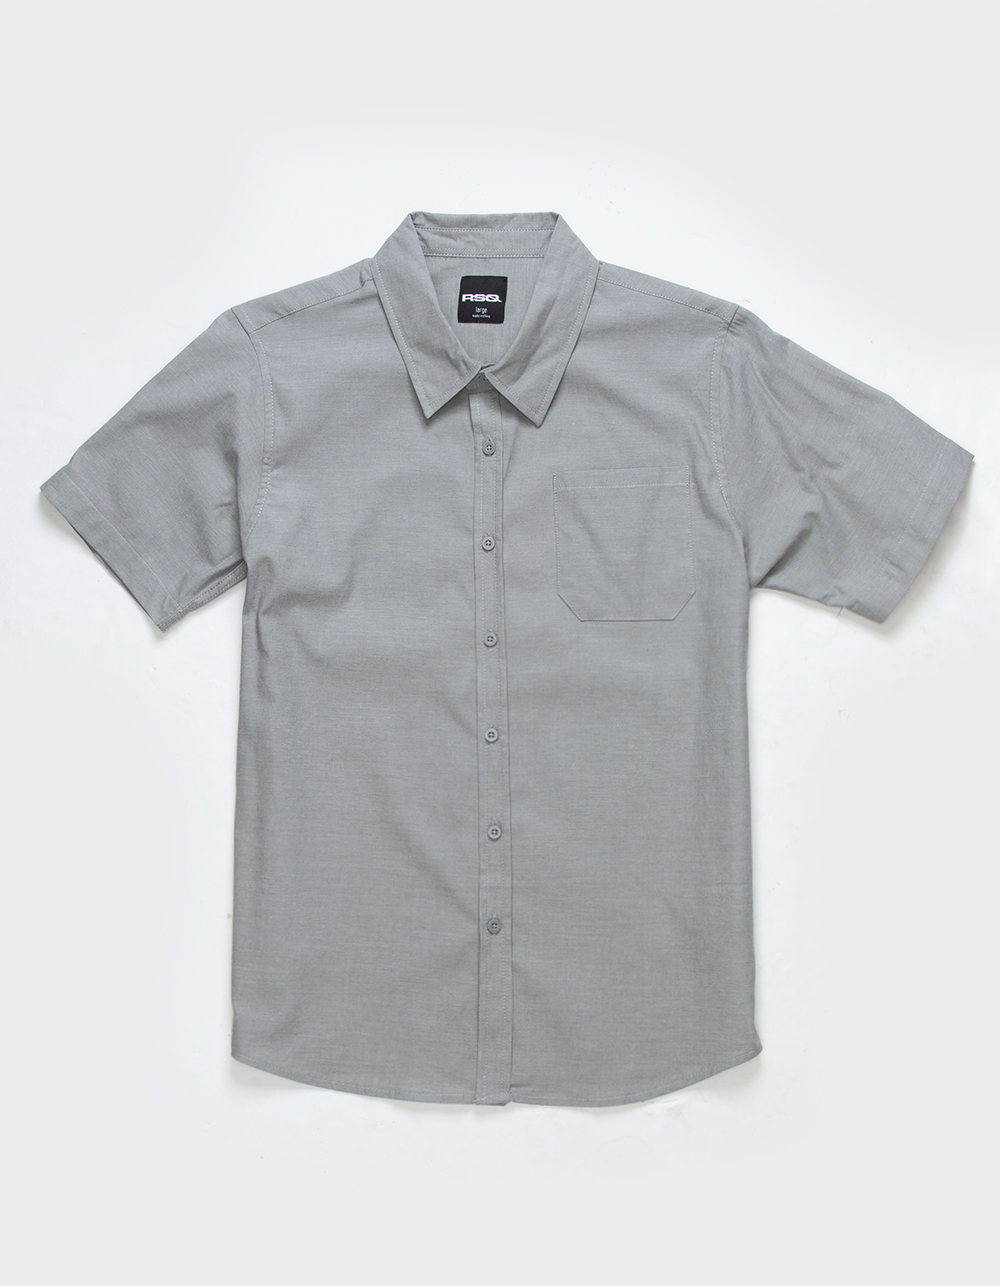 RSQ Boys Solid Chambray Button Down Shirt - GRAY | Tillys